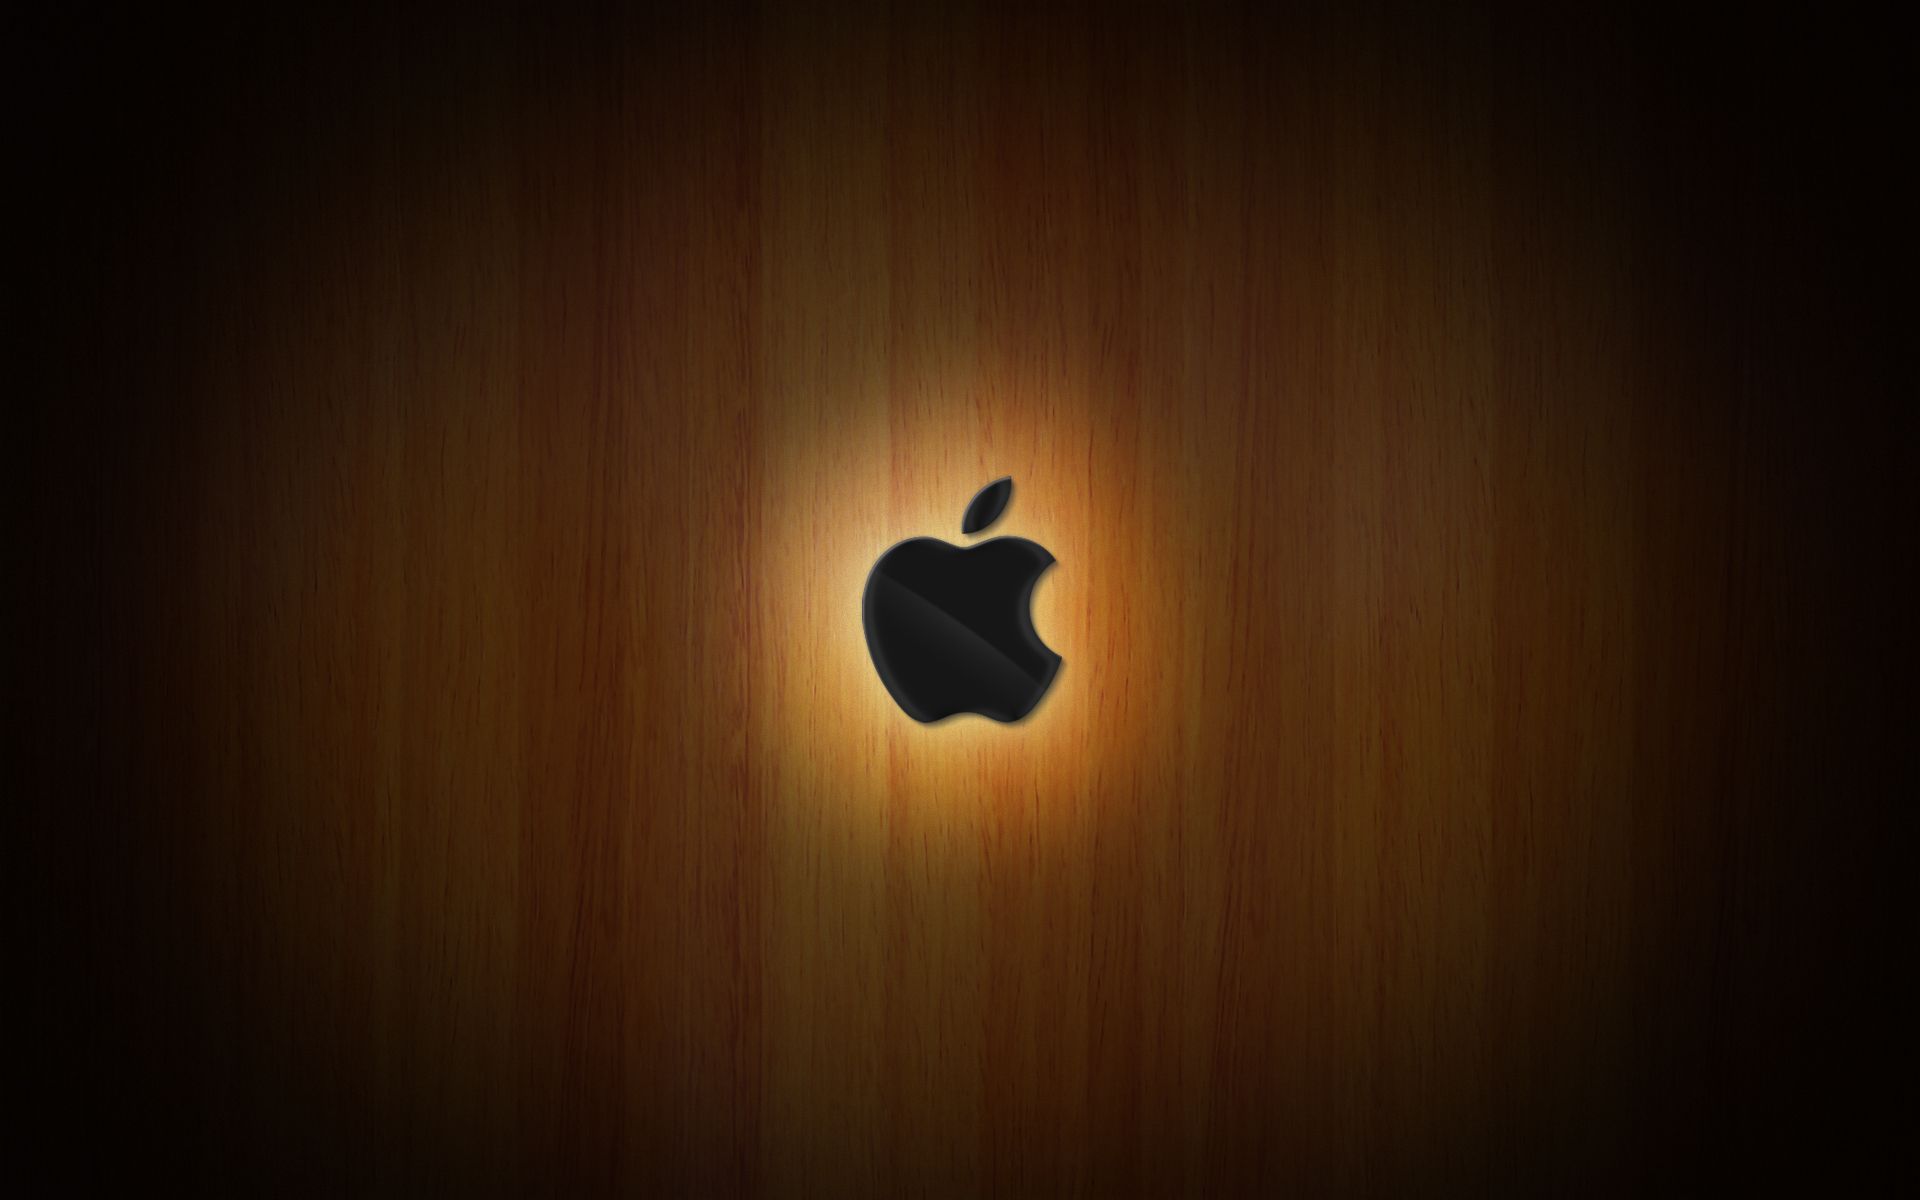 Wallpaper of Mac os for fans of Brown. Apple wallpaper iphone, HD apple wallpaper, Apple logo wallpaper